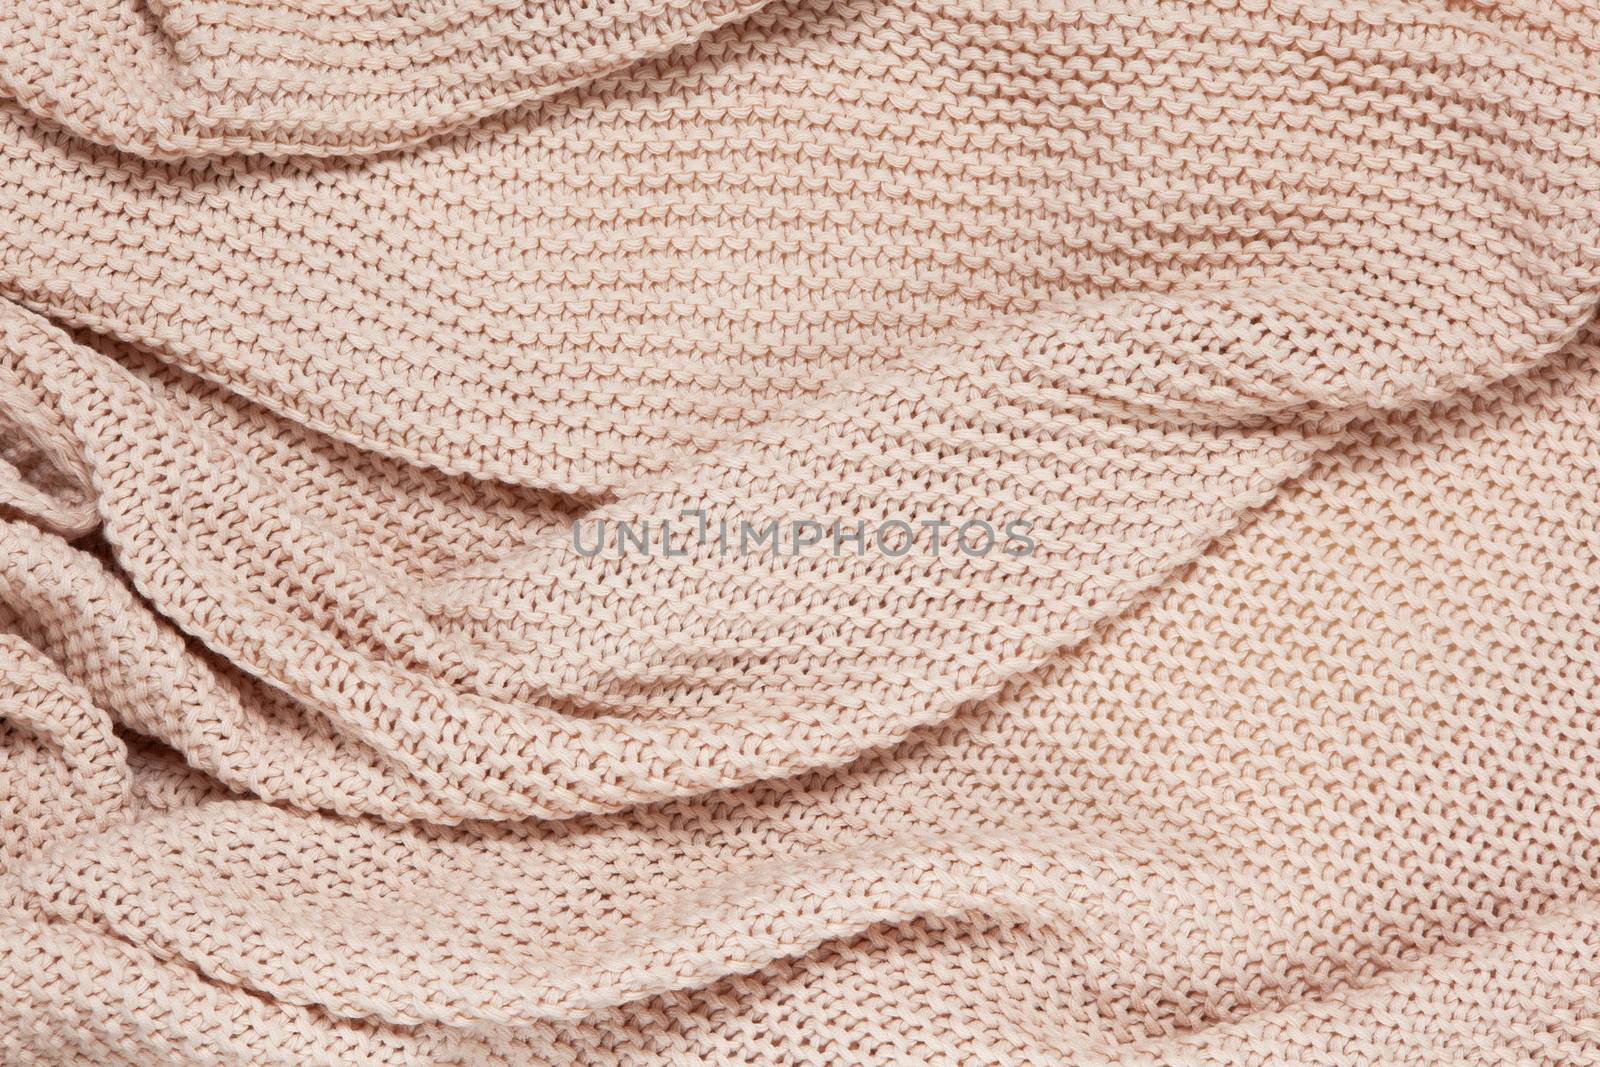 Textured surface of knitted cotton wave plaid, top view. Soft dusty pink pastel wool backdrop. Seasonal cosiness flat lay. Scandinavian minimal style. Stay at home, cozy, femininity concept.